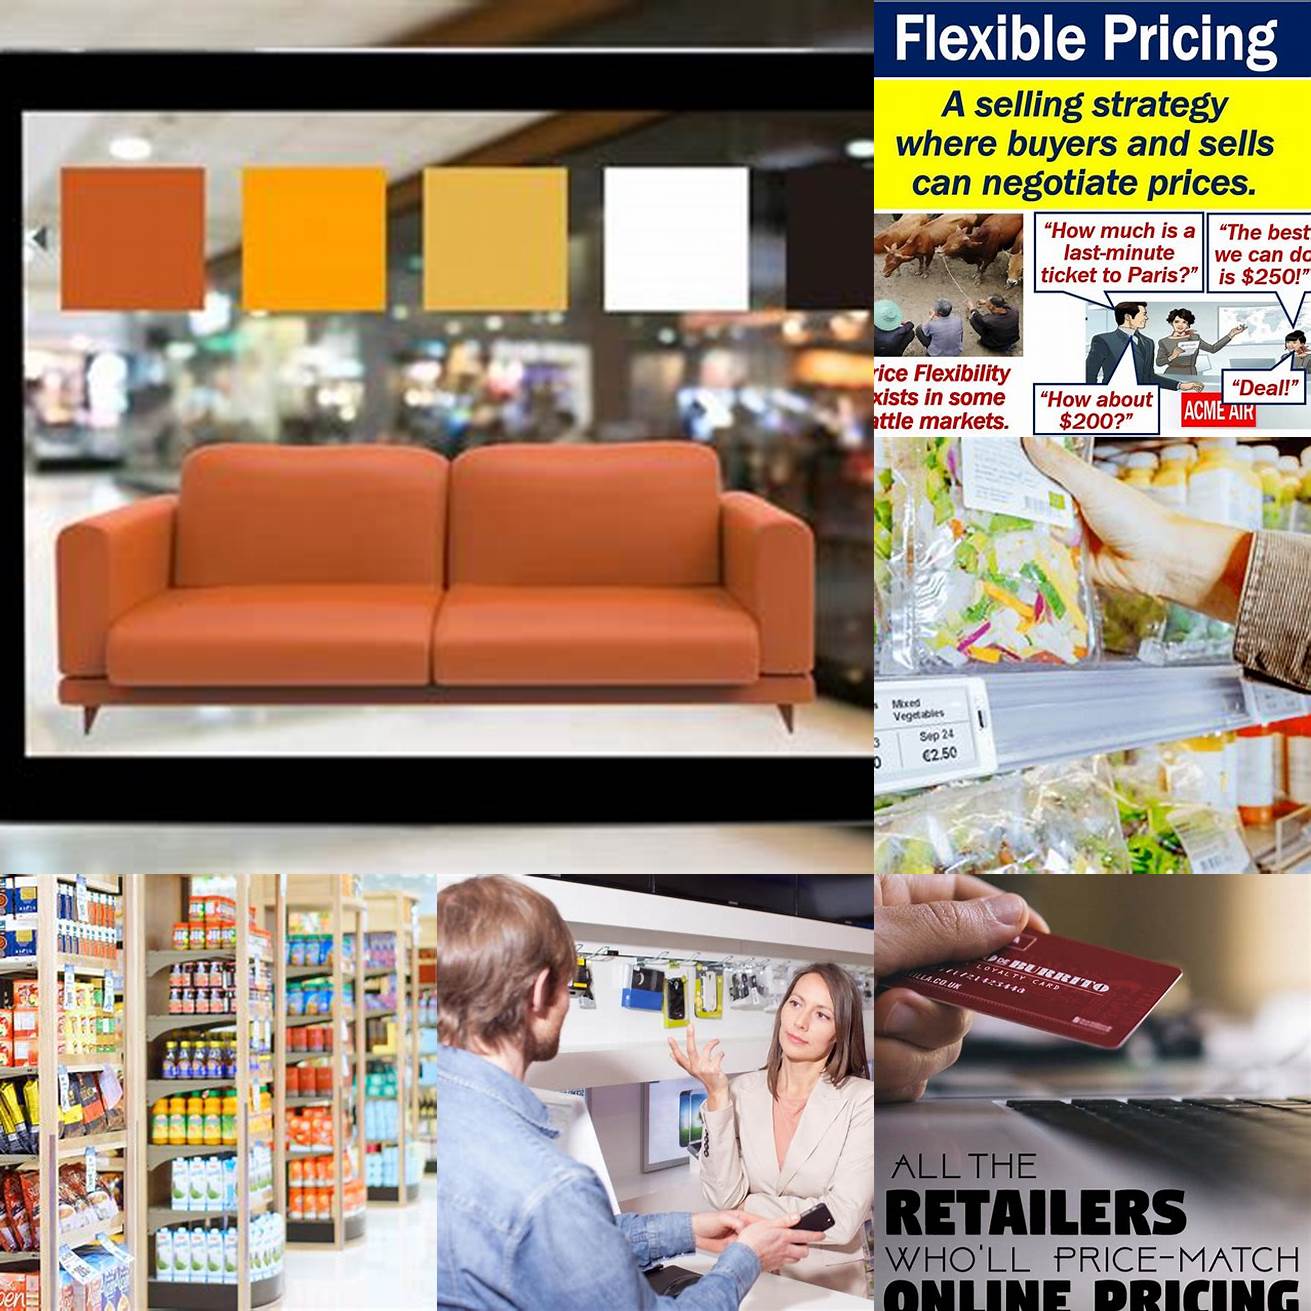 Less flexibility Retailers may be limited in their ability to customize products or negotiate pricing